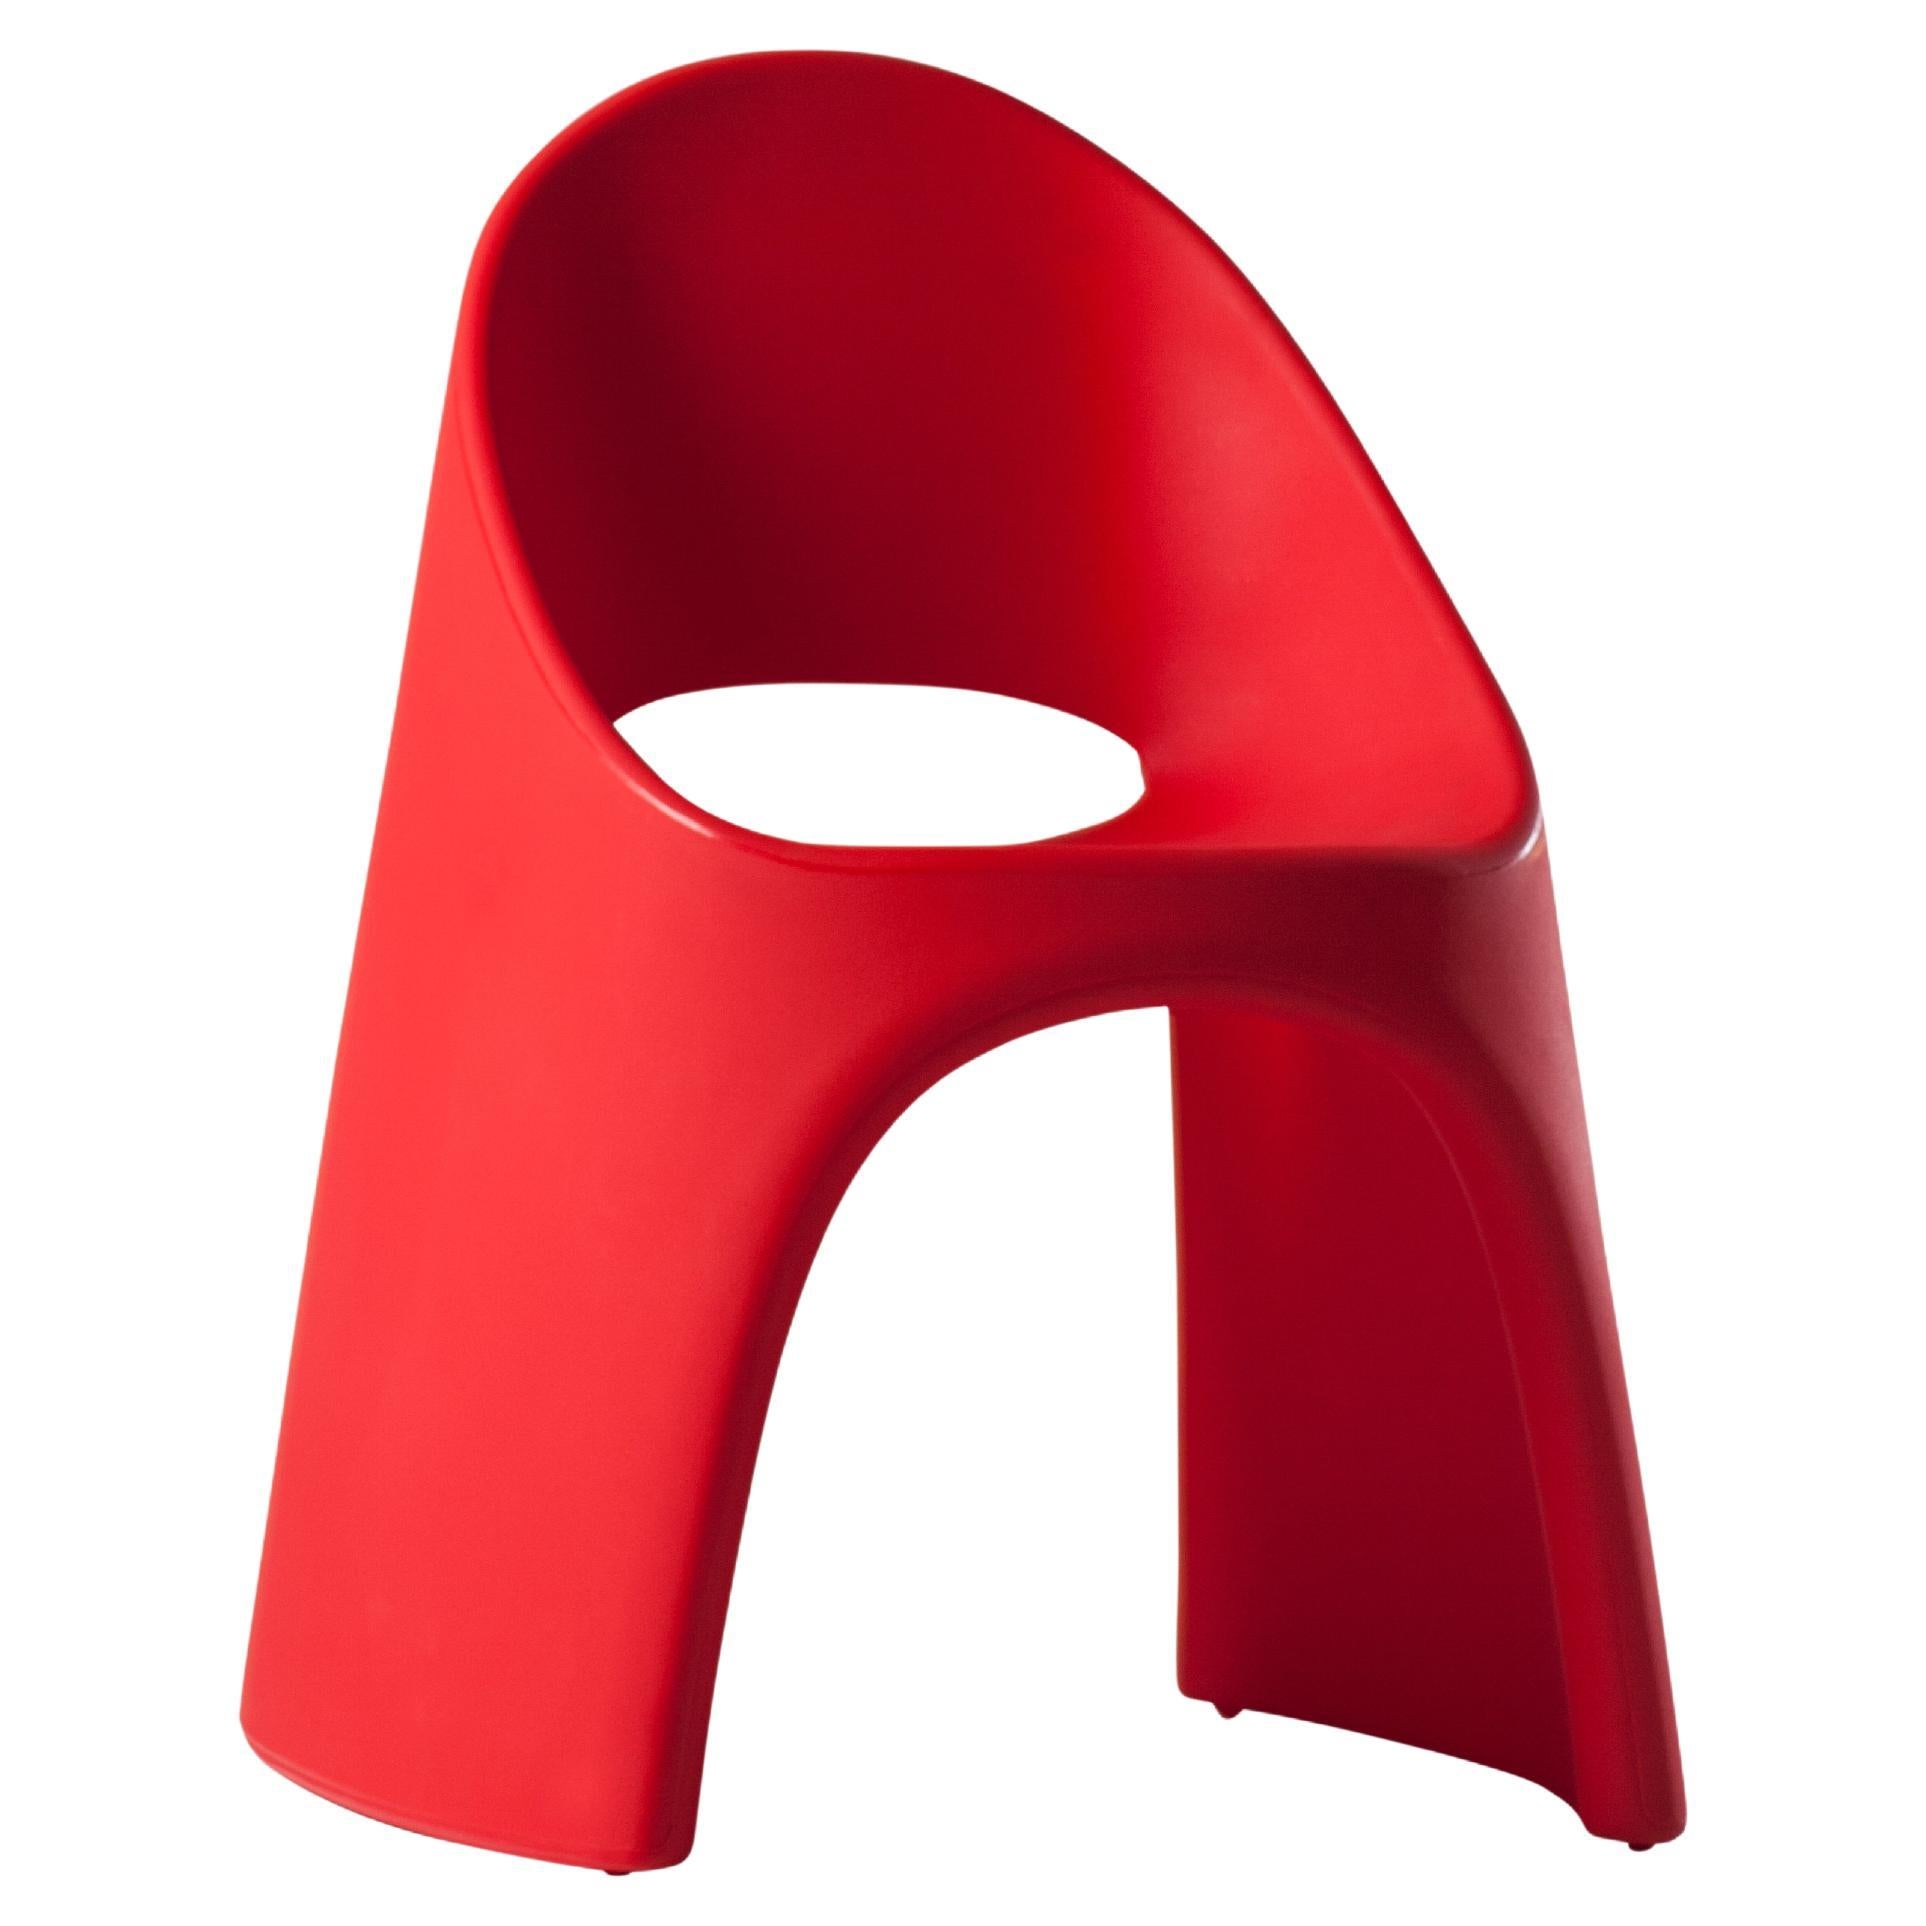 Slide Design Amélie Chair in Flame Red by Italo Pertichini For Sale